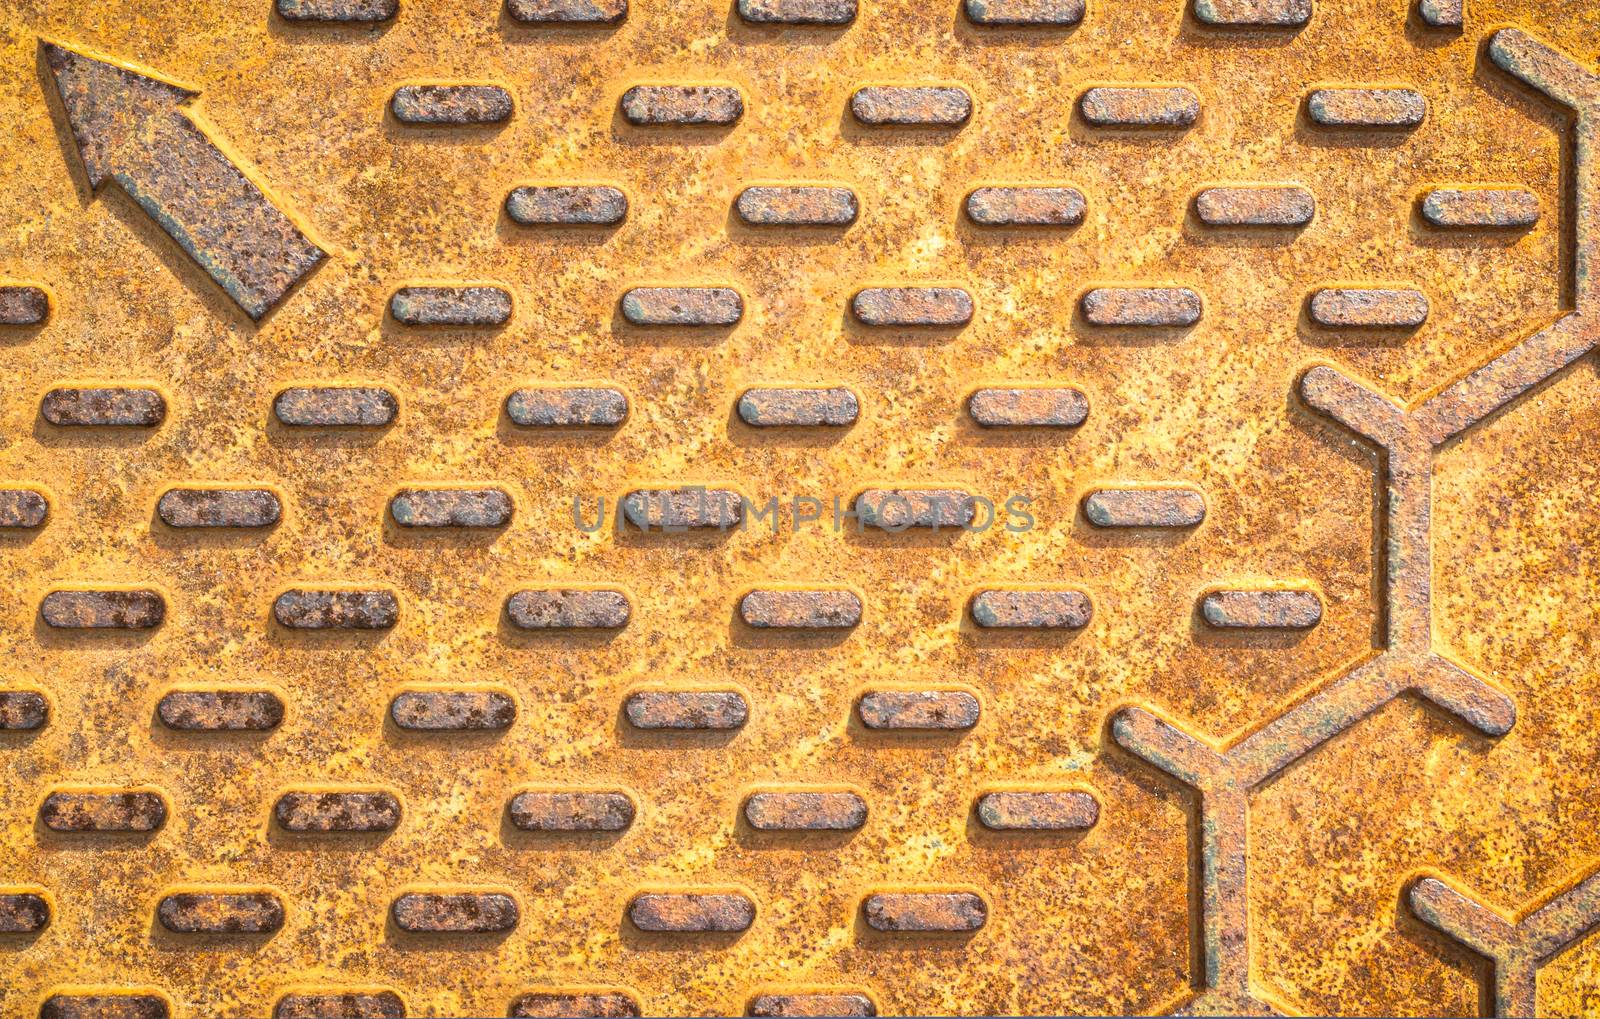 Steel rusty texture from Manhole cover. Orange metallic background. Detail of Manhole cover pattern.